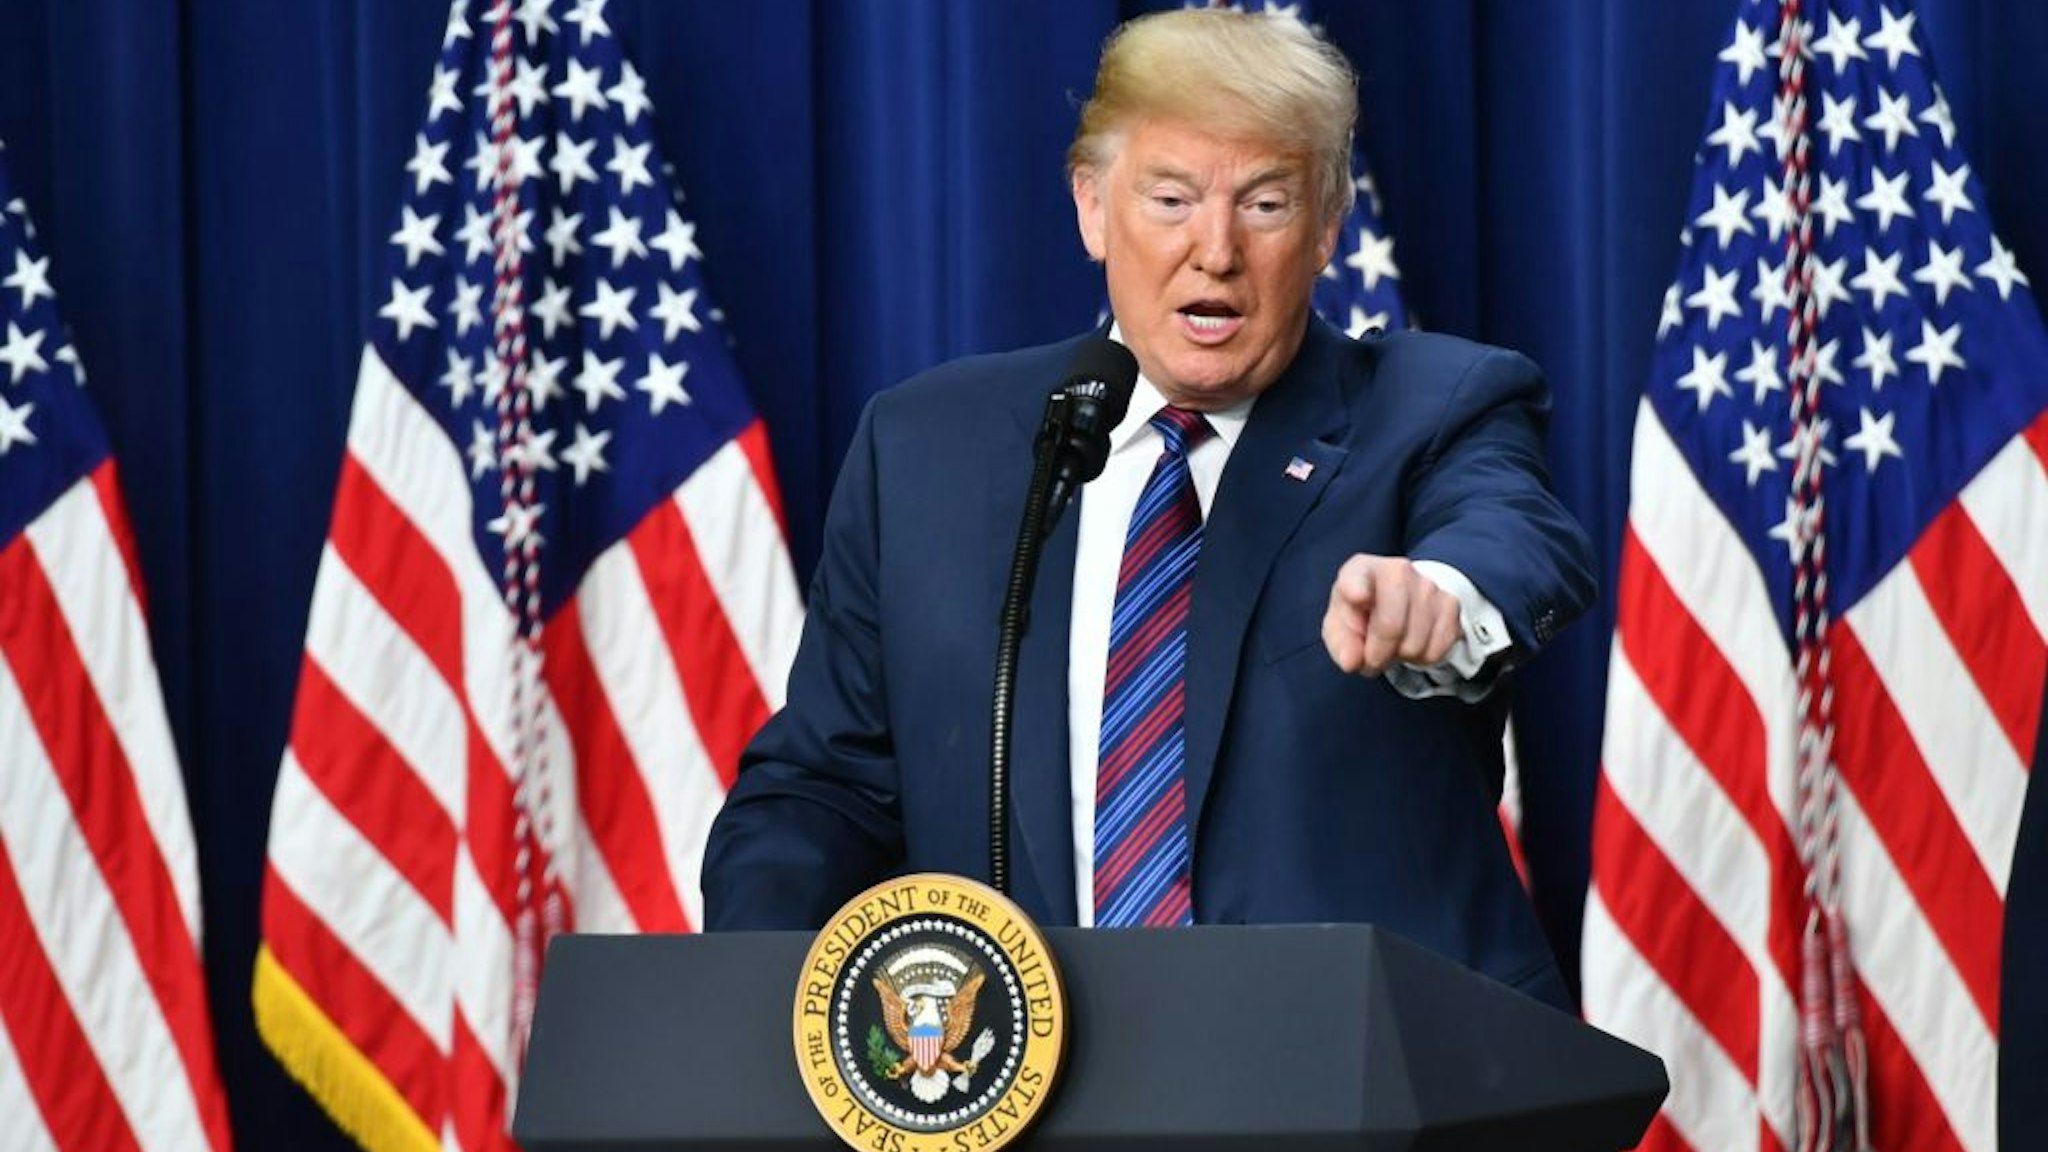 US President Donald Trump speaks before signing the "Right To Try Act", which allows terminally ill patients to seek treatment using drugs that have not yet been approved, at the White House in Washington, DC, on May 30, 2018.